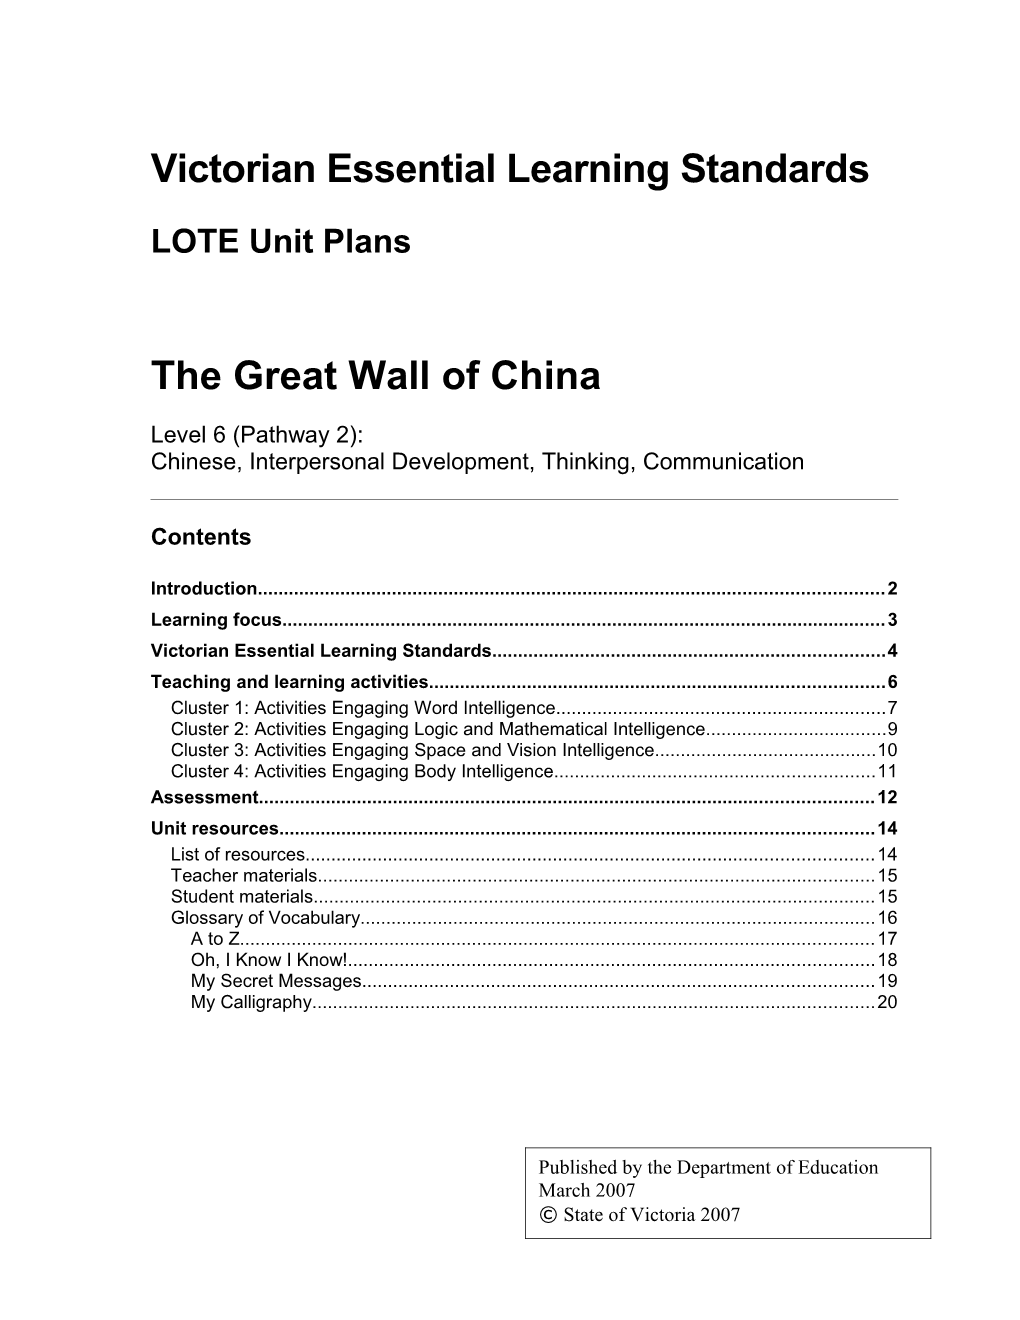 Victorian Essential Learning Standards: the Great Wall of China Level 6 Pathway 2